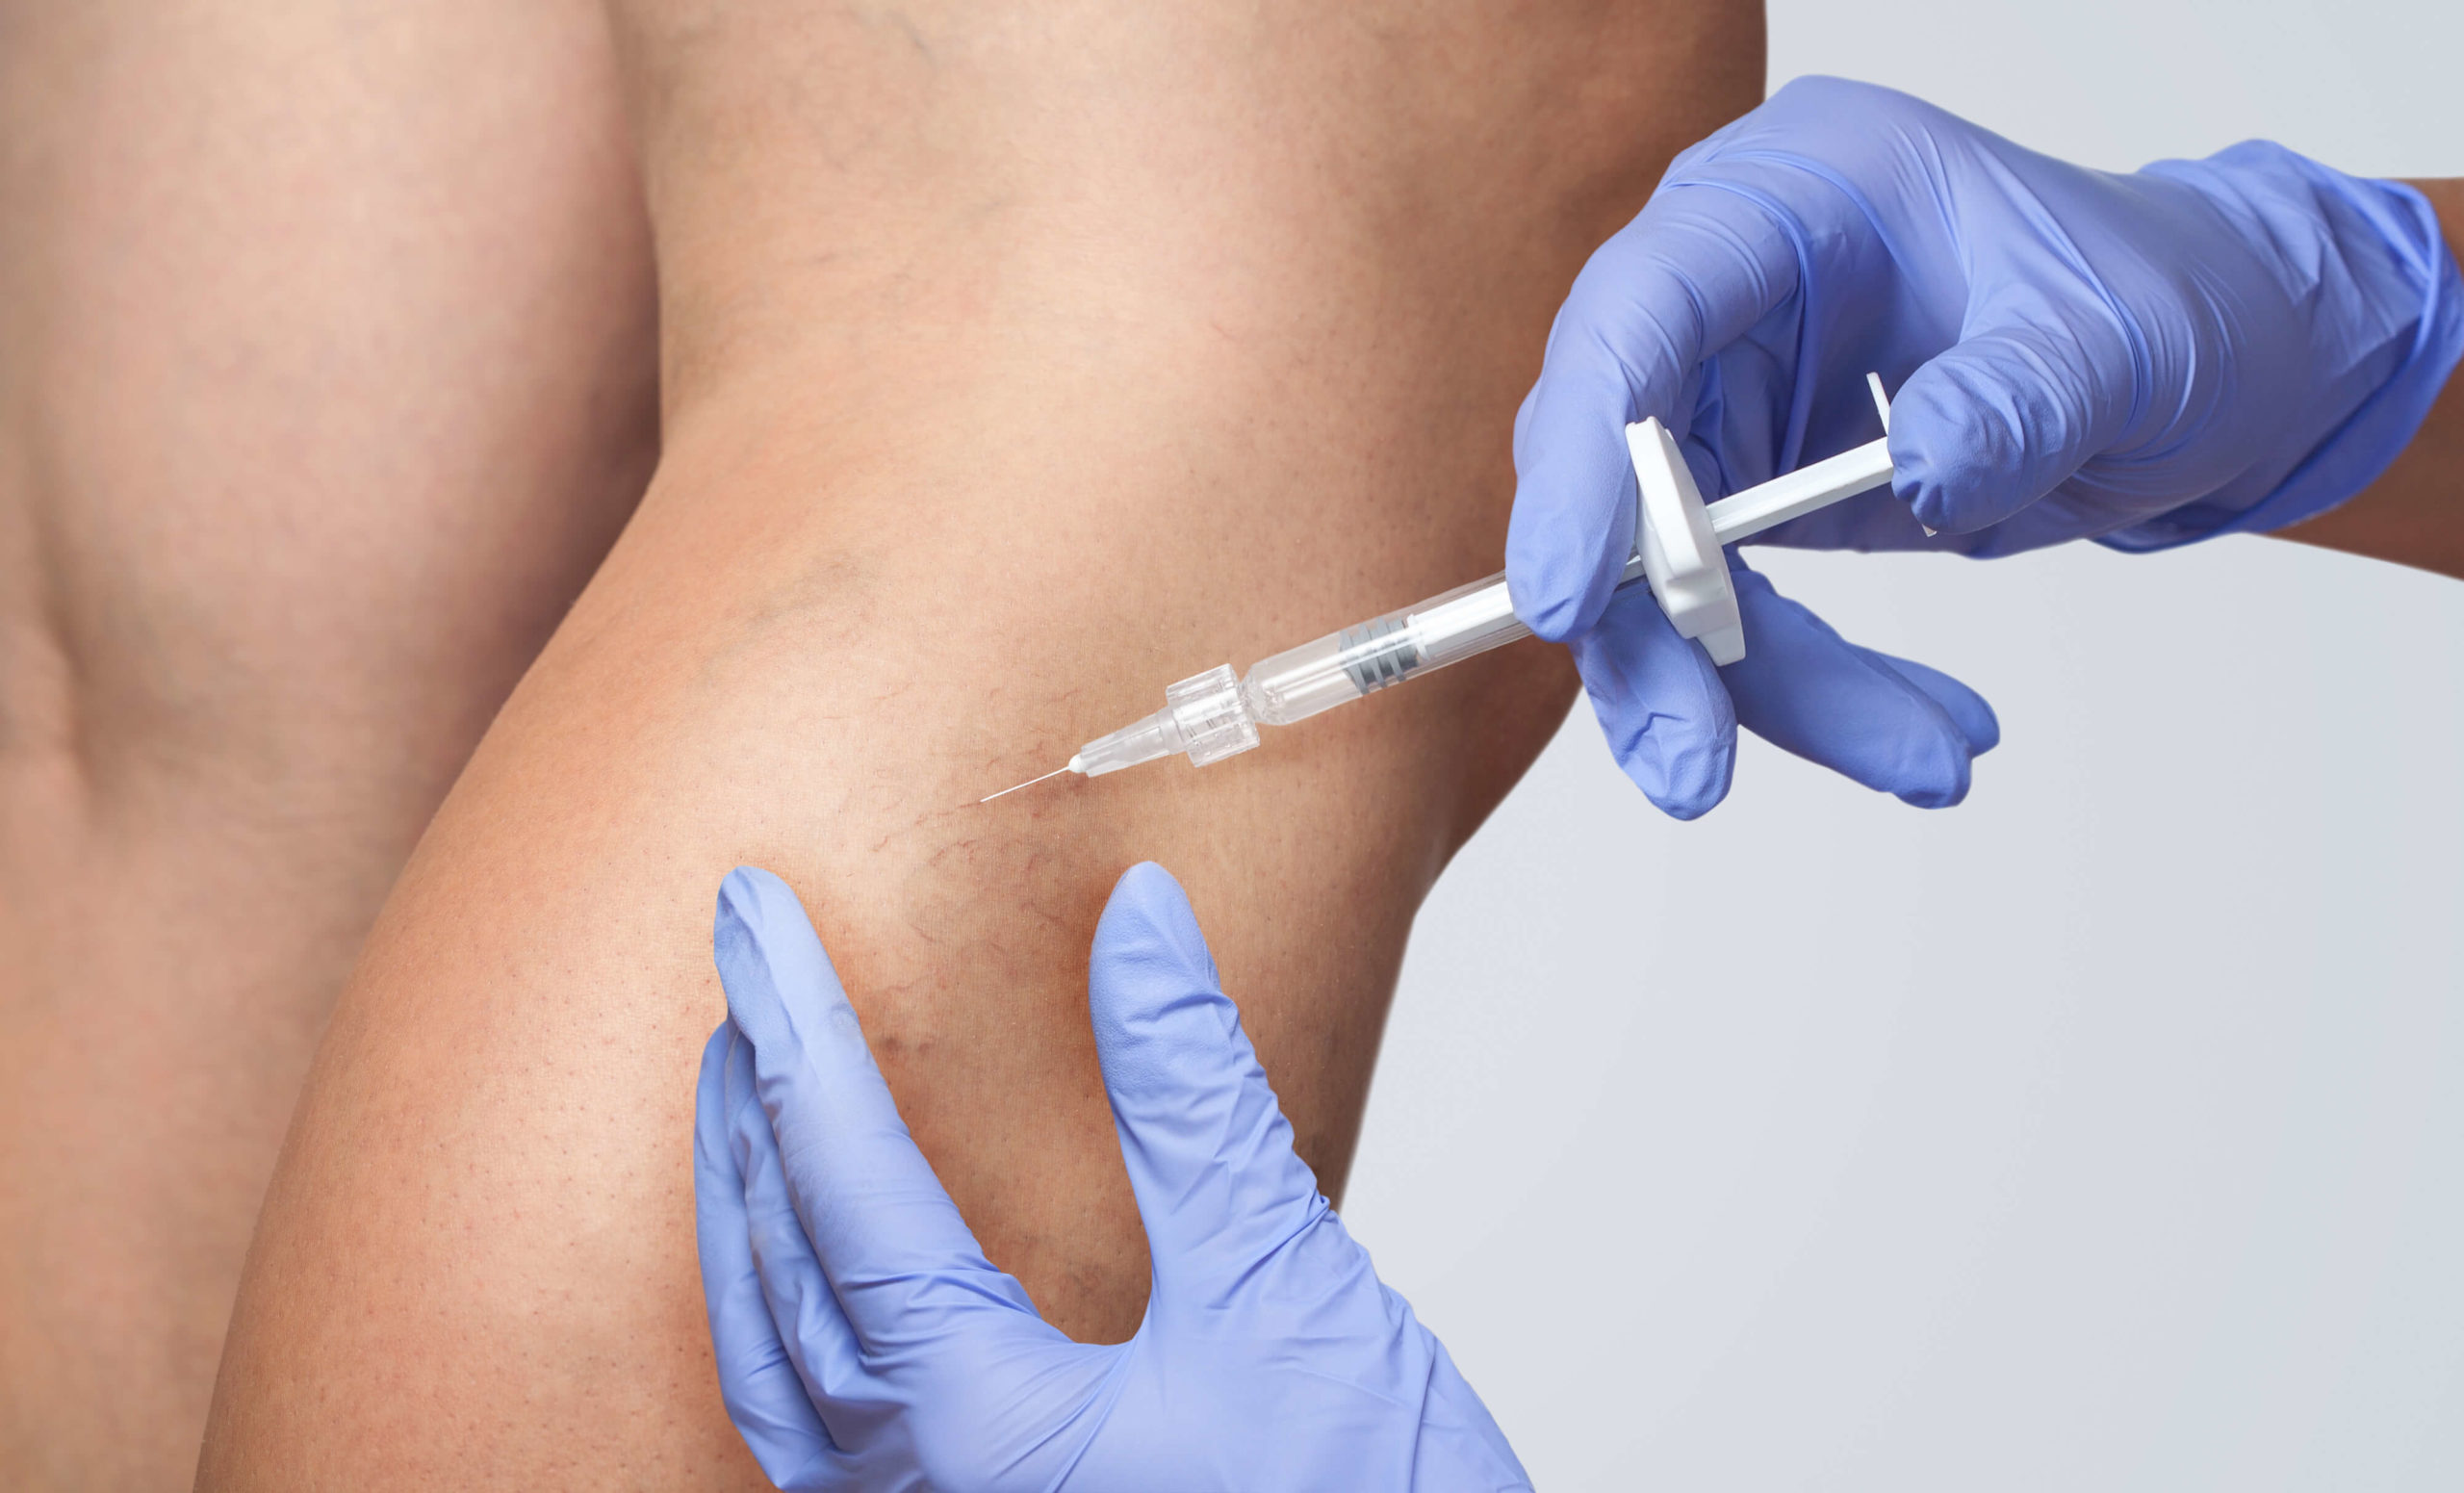 Sclerotherapy in Flint Michigan is a treatment for varicose veins and spider veins. This image shows a vein doctor injecting medication into a diseased vein.